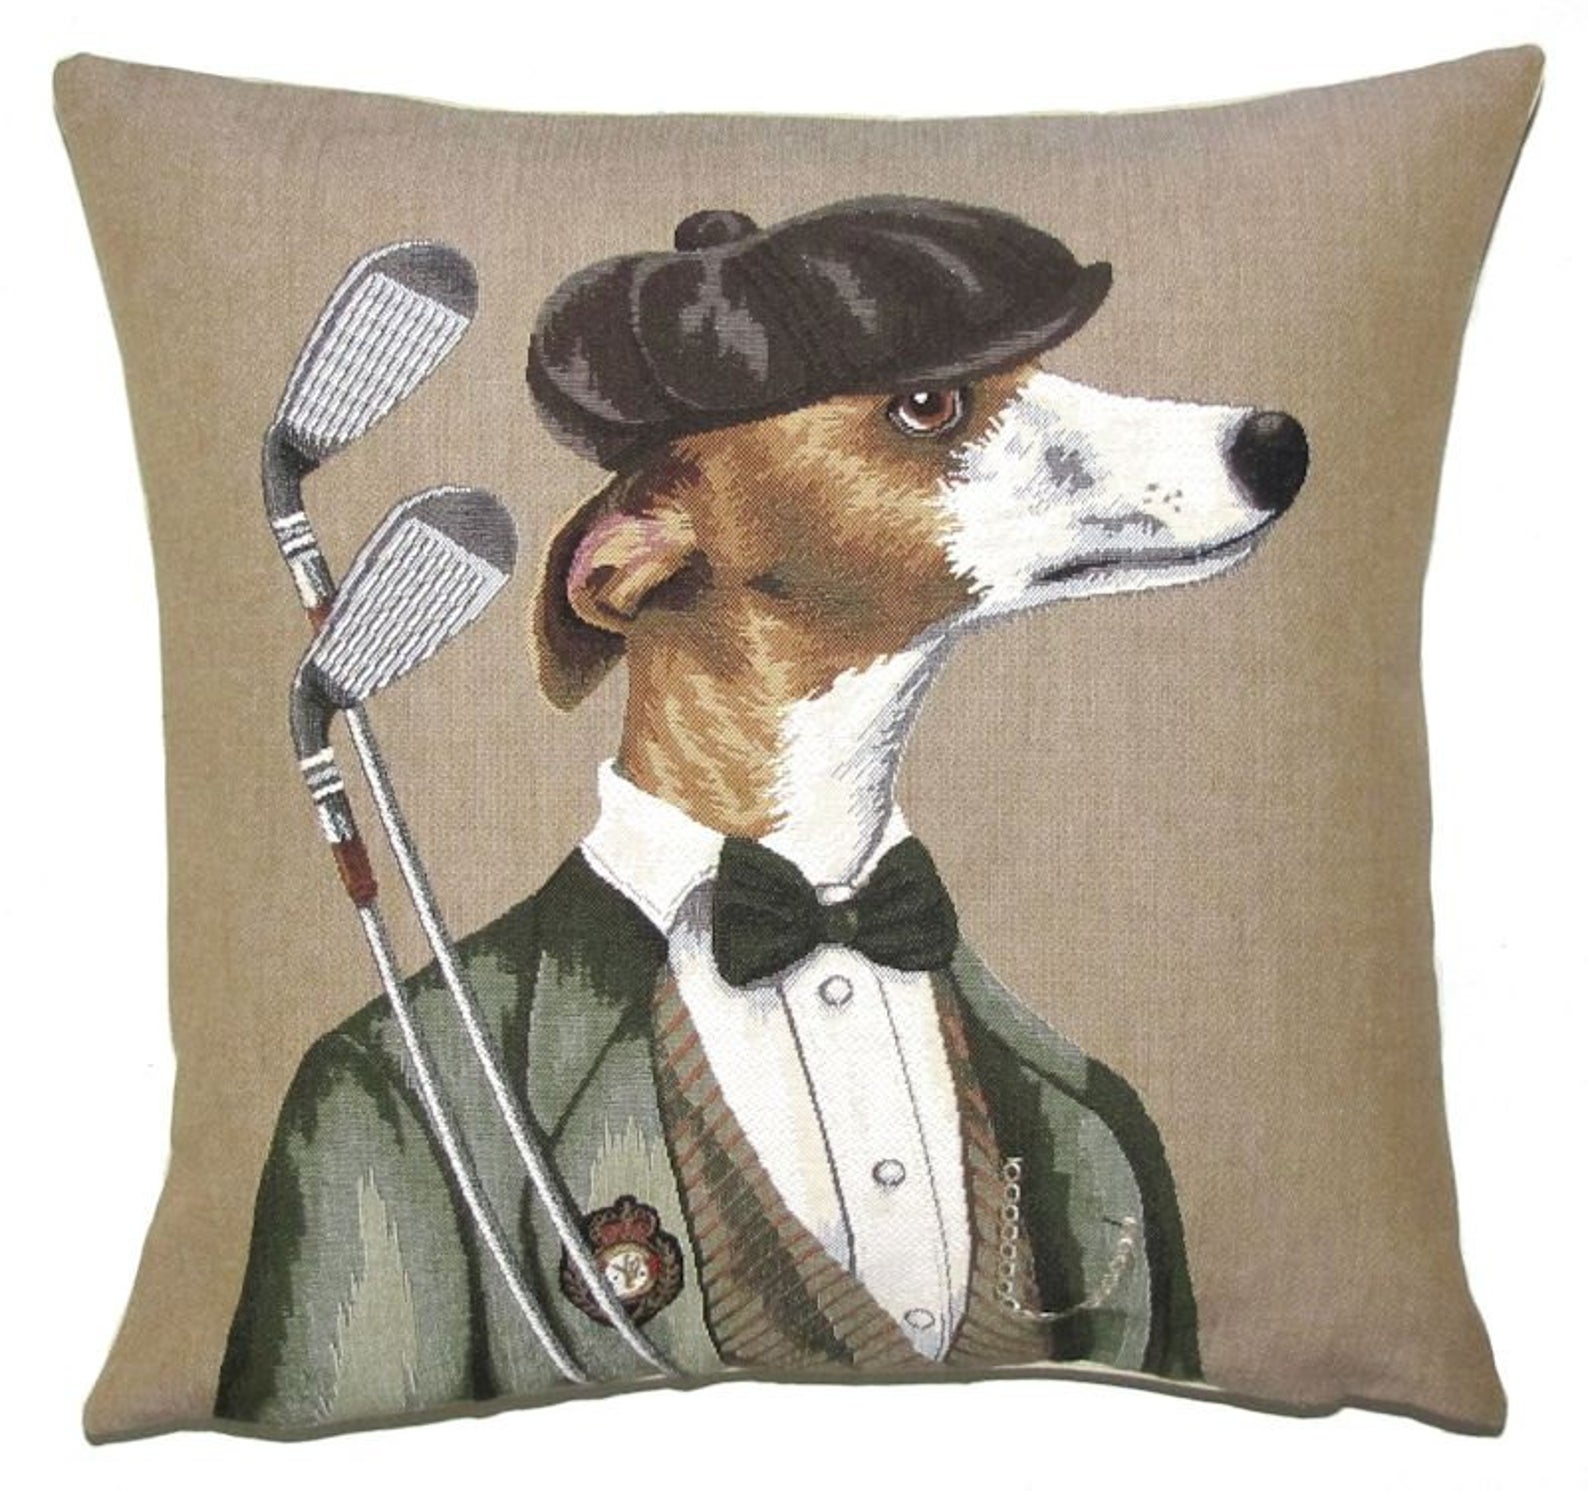 DOG Whippet Greyhound Wool Needlepoint Pillow Cushion Cover  16” X 16”